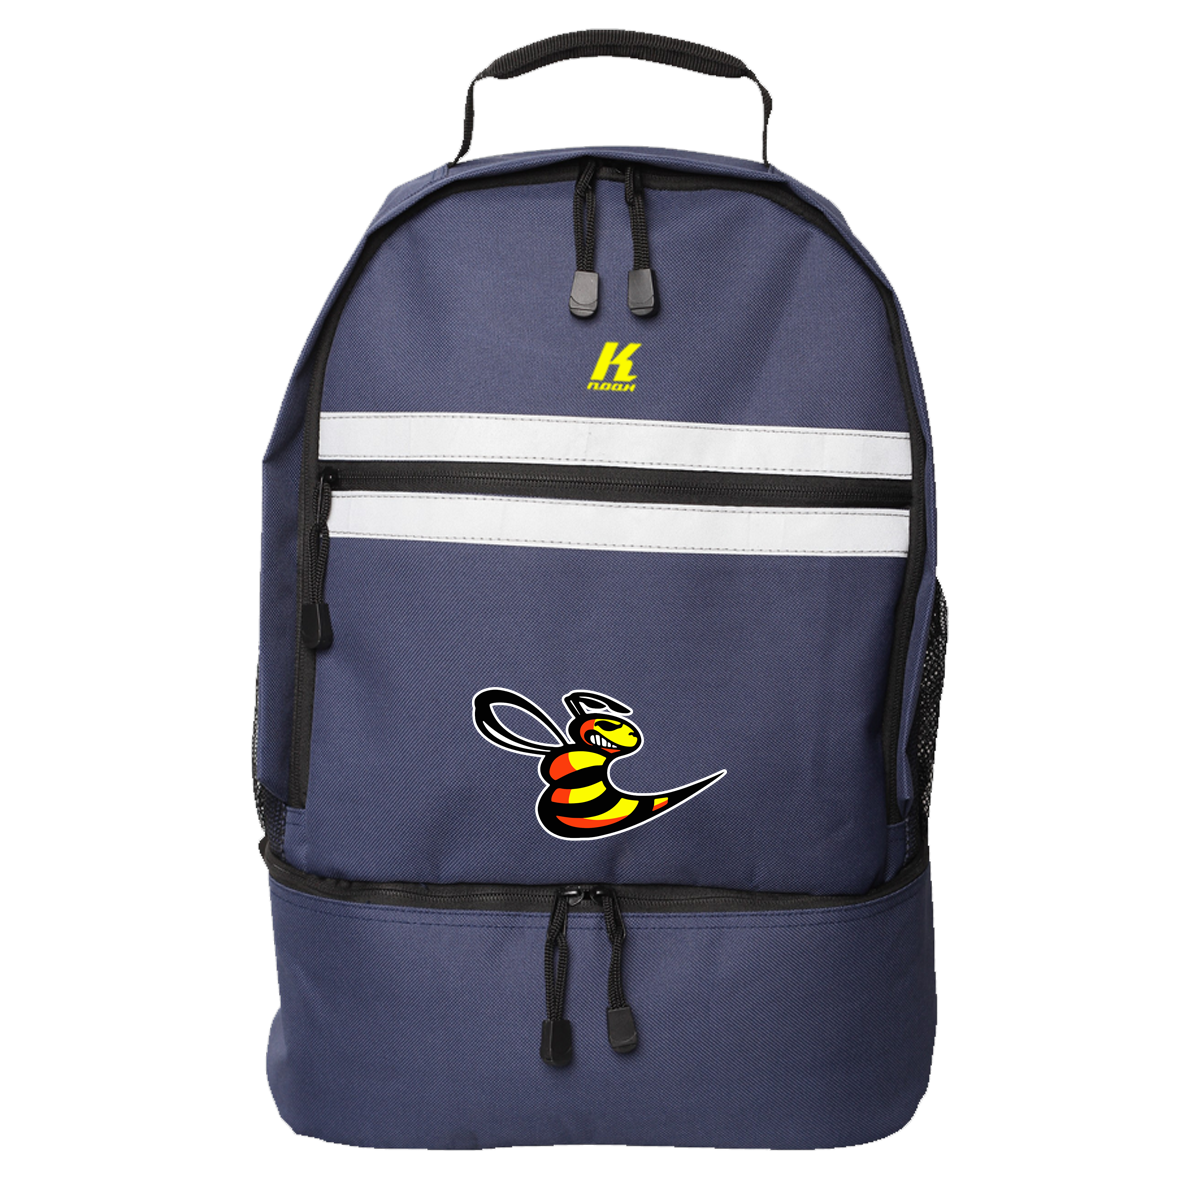 Hornets Players Backpack